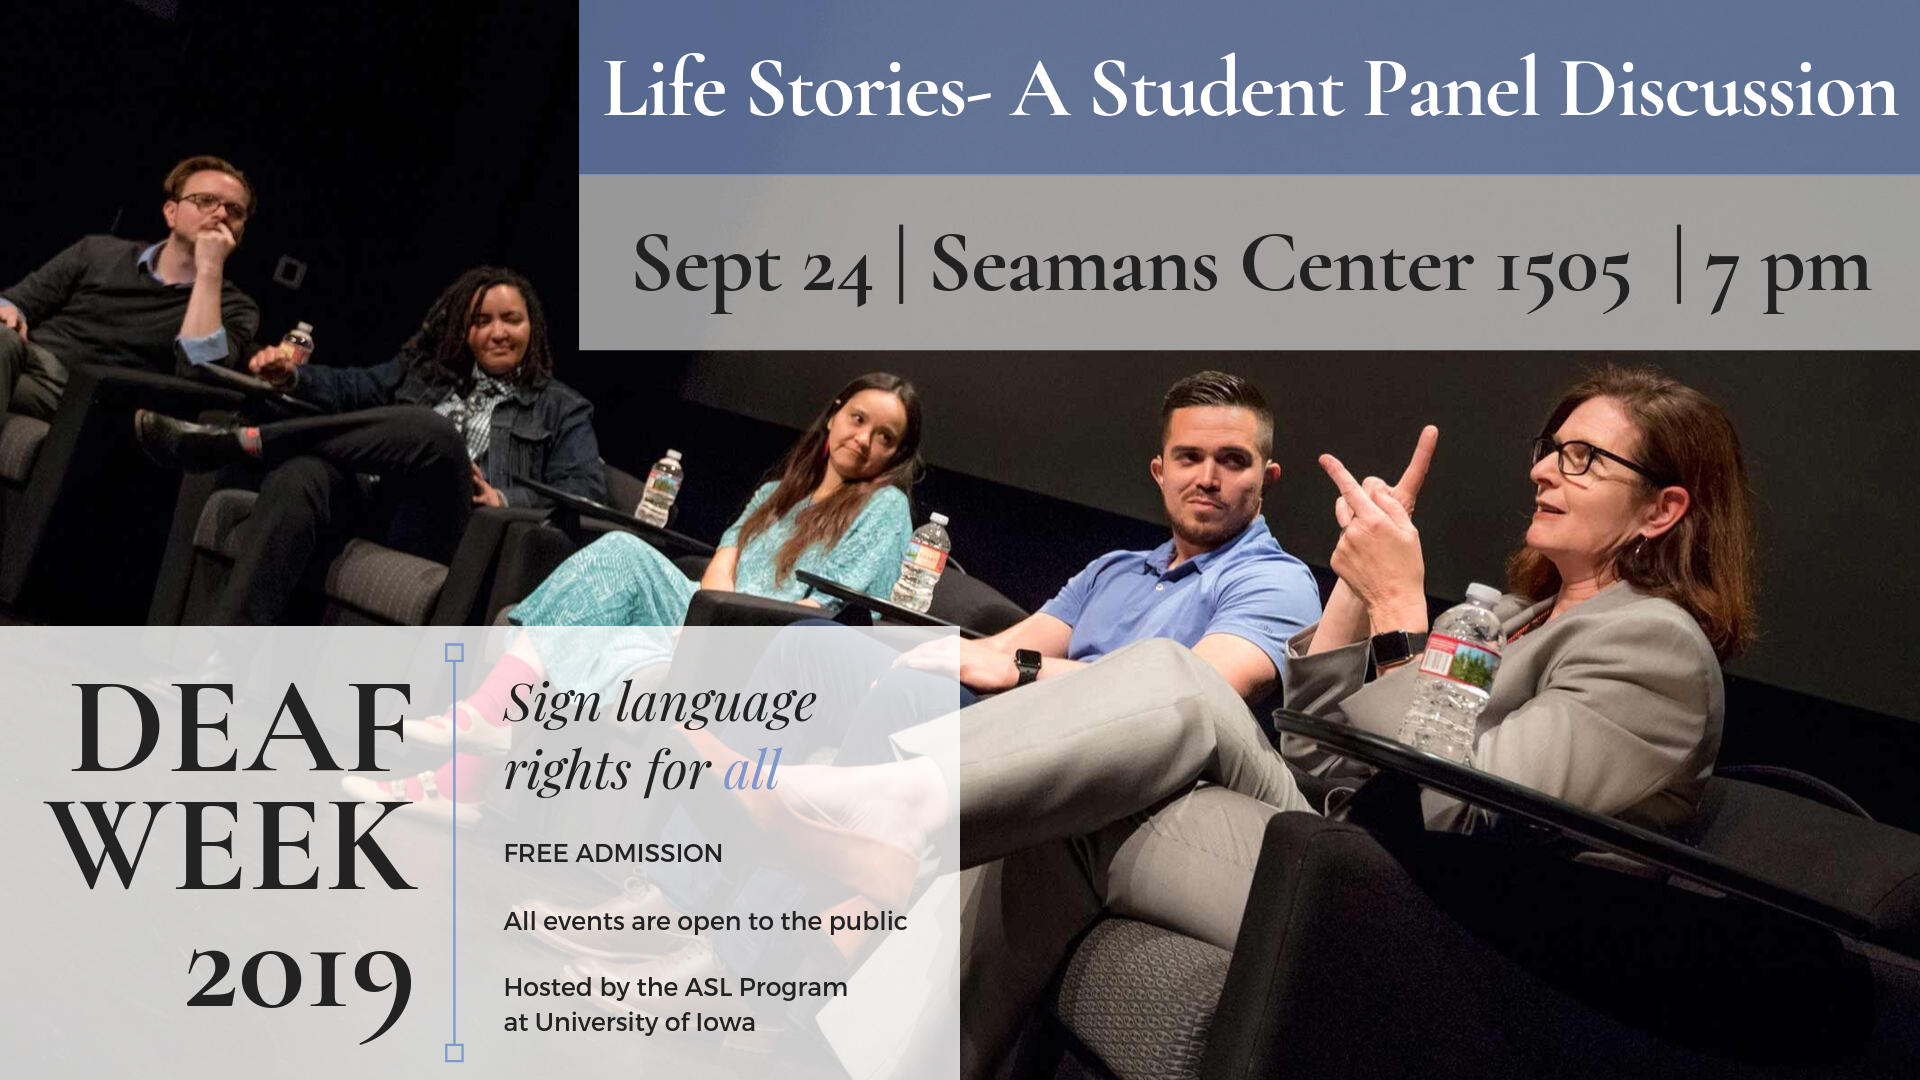 Life Stories, A Student Panel Discussion September 24 in the Seamans Center 1505 at 7pm Deaf Week 2019 Sign language rights for all Free Admission All events are open to the public Hosted by the ASL Department at the University of Iowa